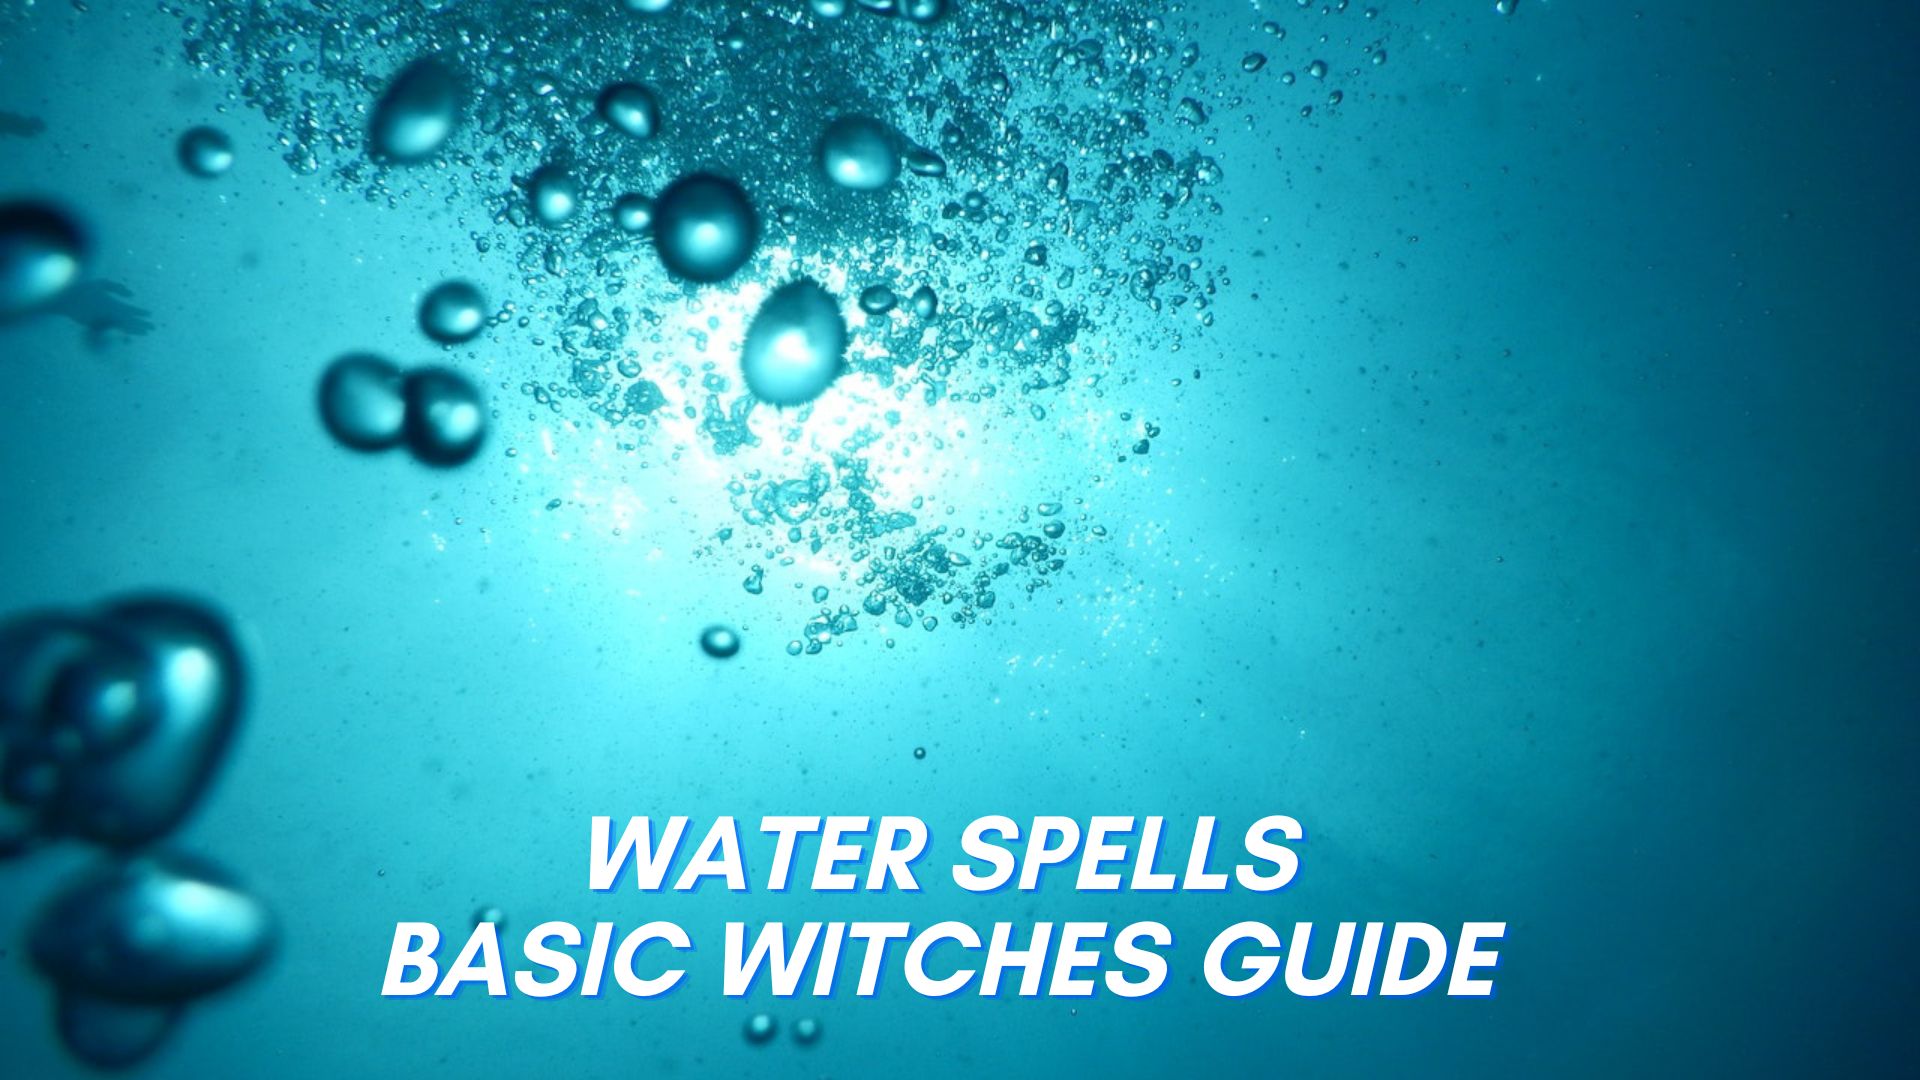 Water Spells - Basic Witches Guide